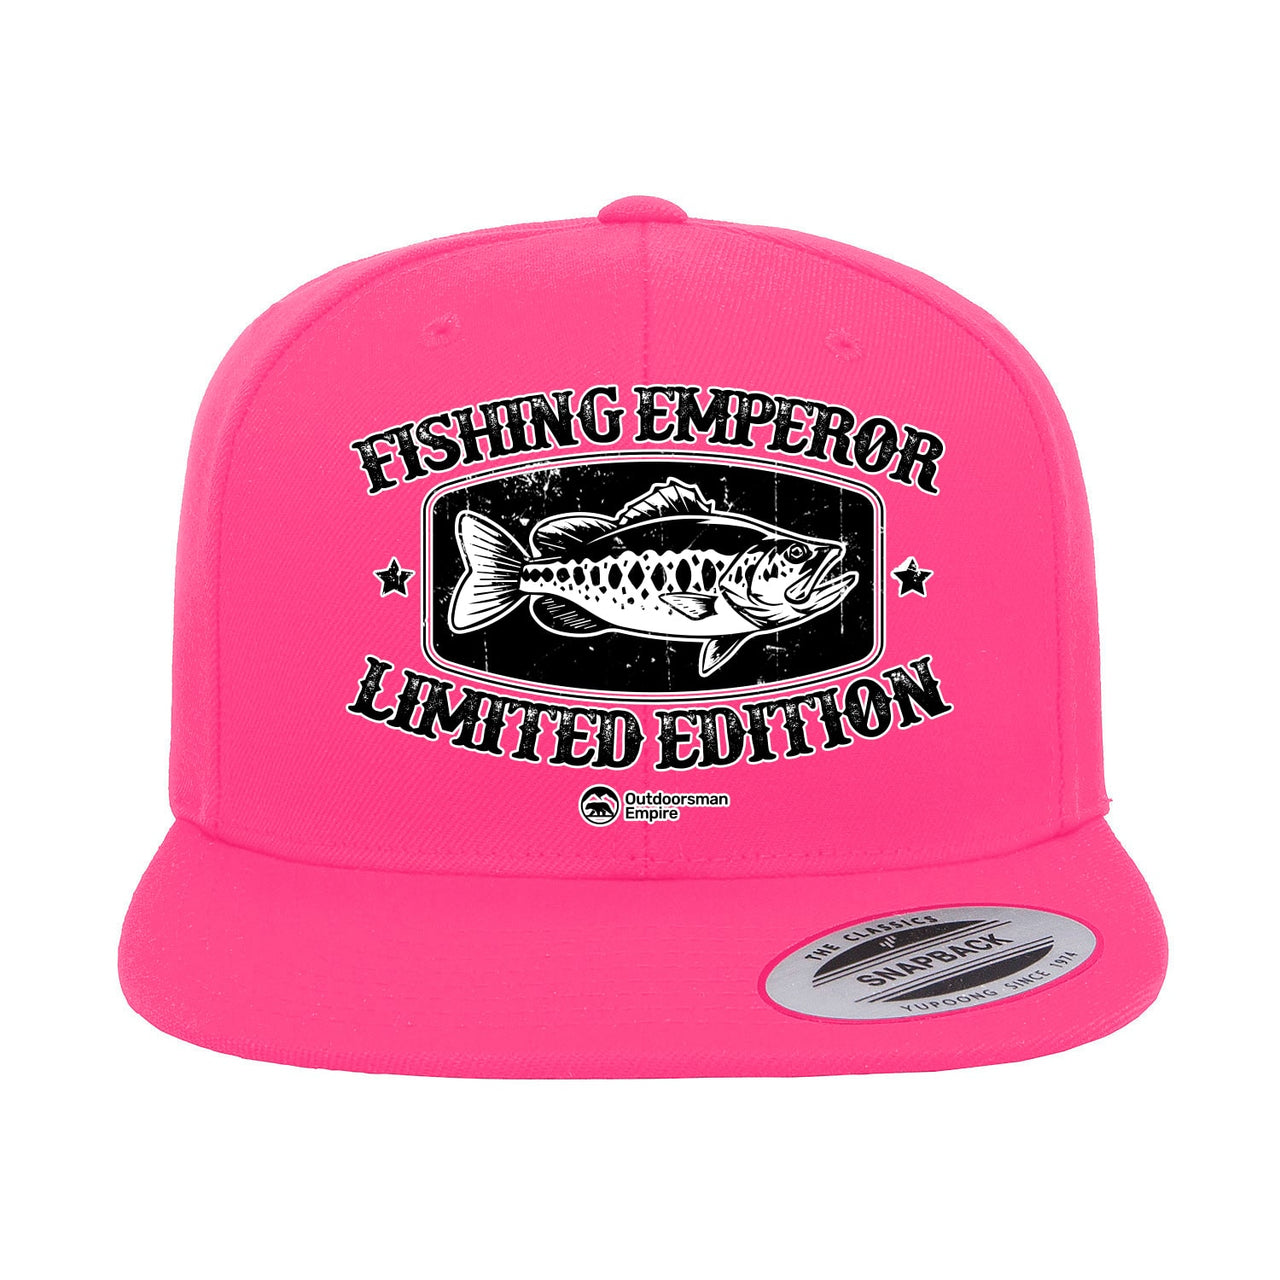 Fishing Emperor Limited Edition Embroidered Flat Bill Cap